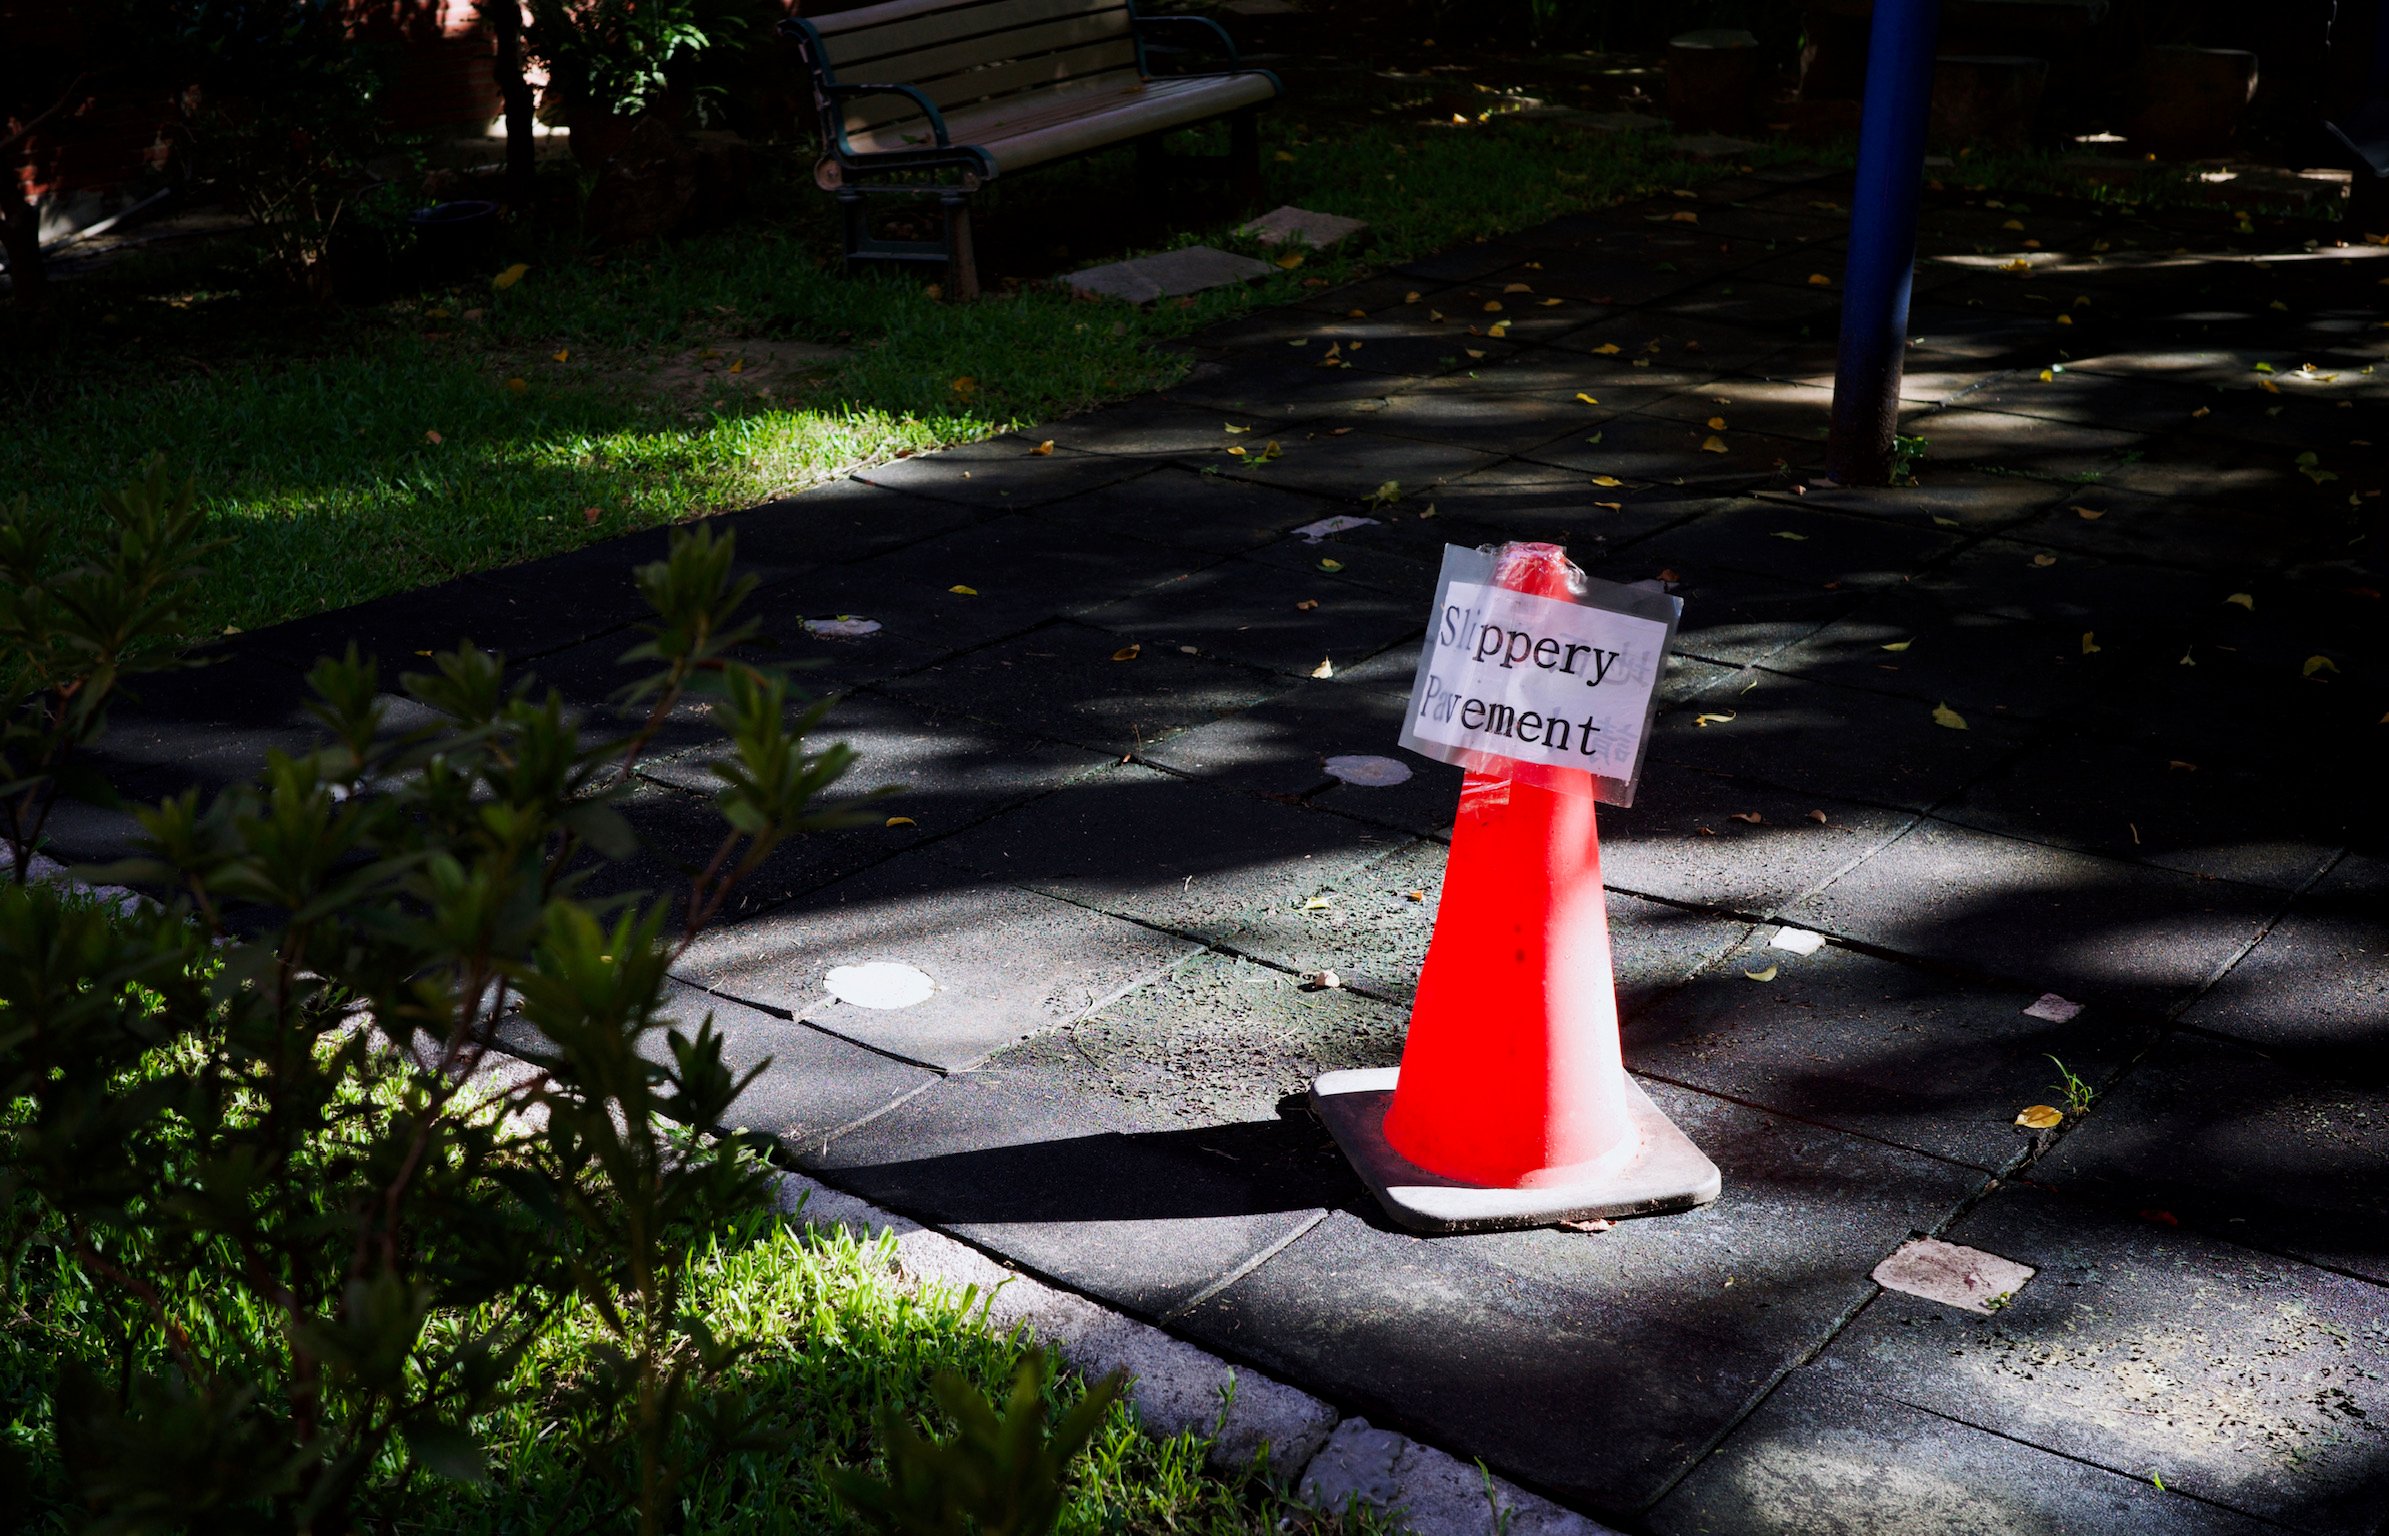 A piece of paper with the text “Slippery Pavement” attached to a traffic cone on the edge of a tiny playground on a sunny day. There’s also an empty park bench.